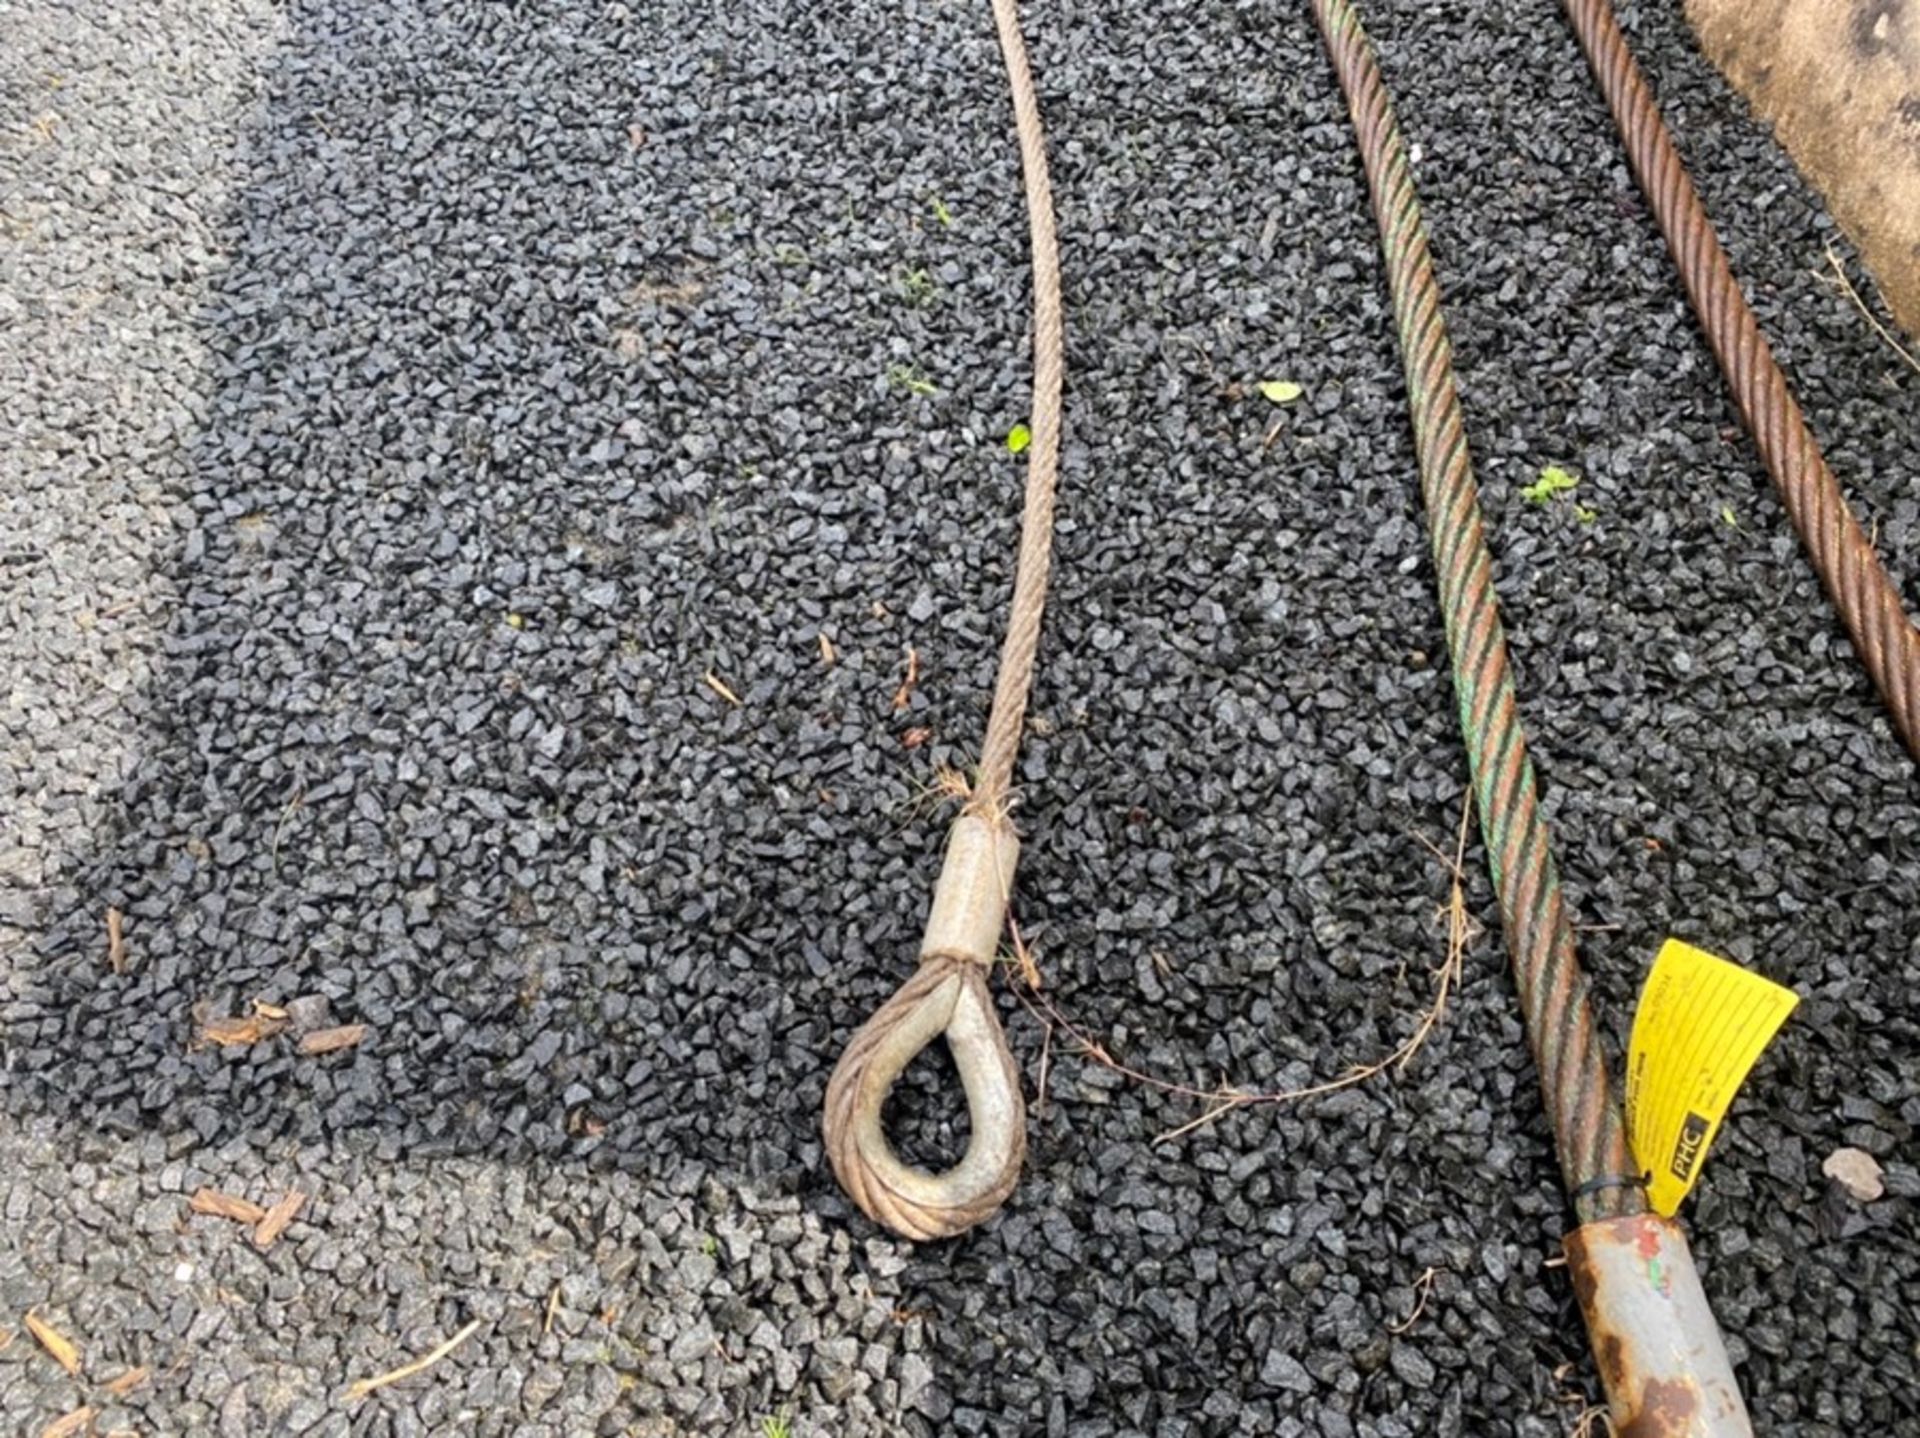 27FT HEAVY DUTY WIRE LIFTING ROPE - Image 2 of 2